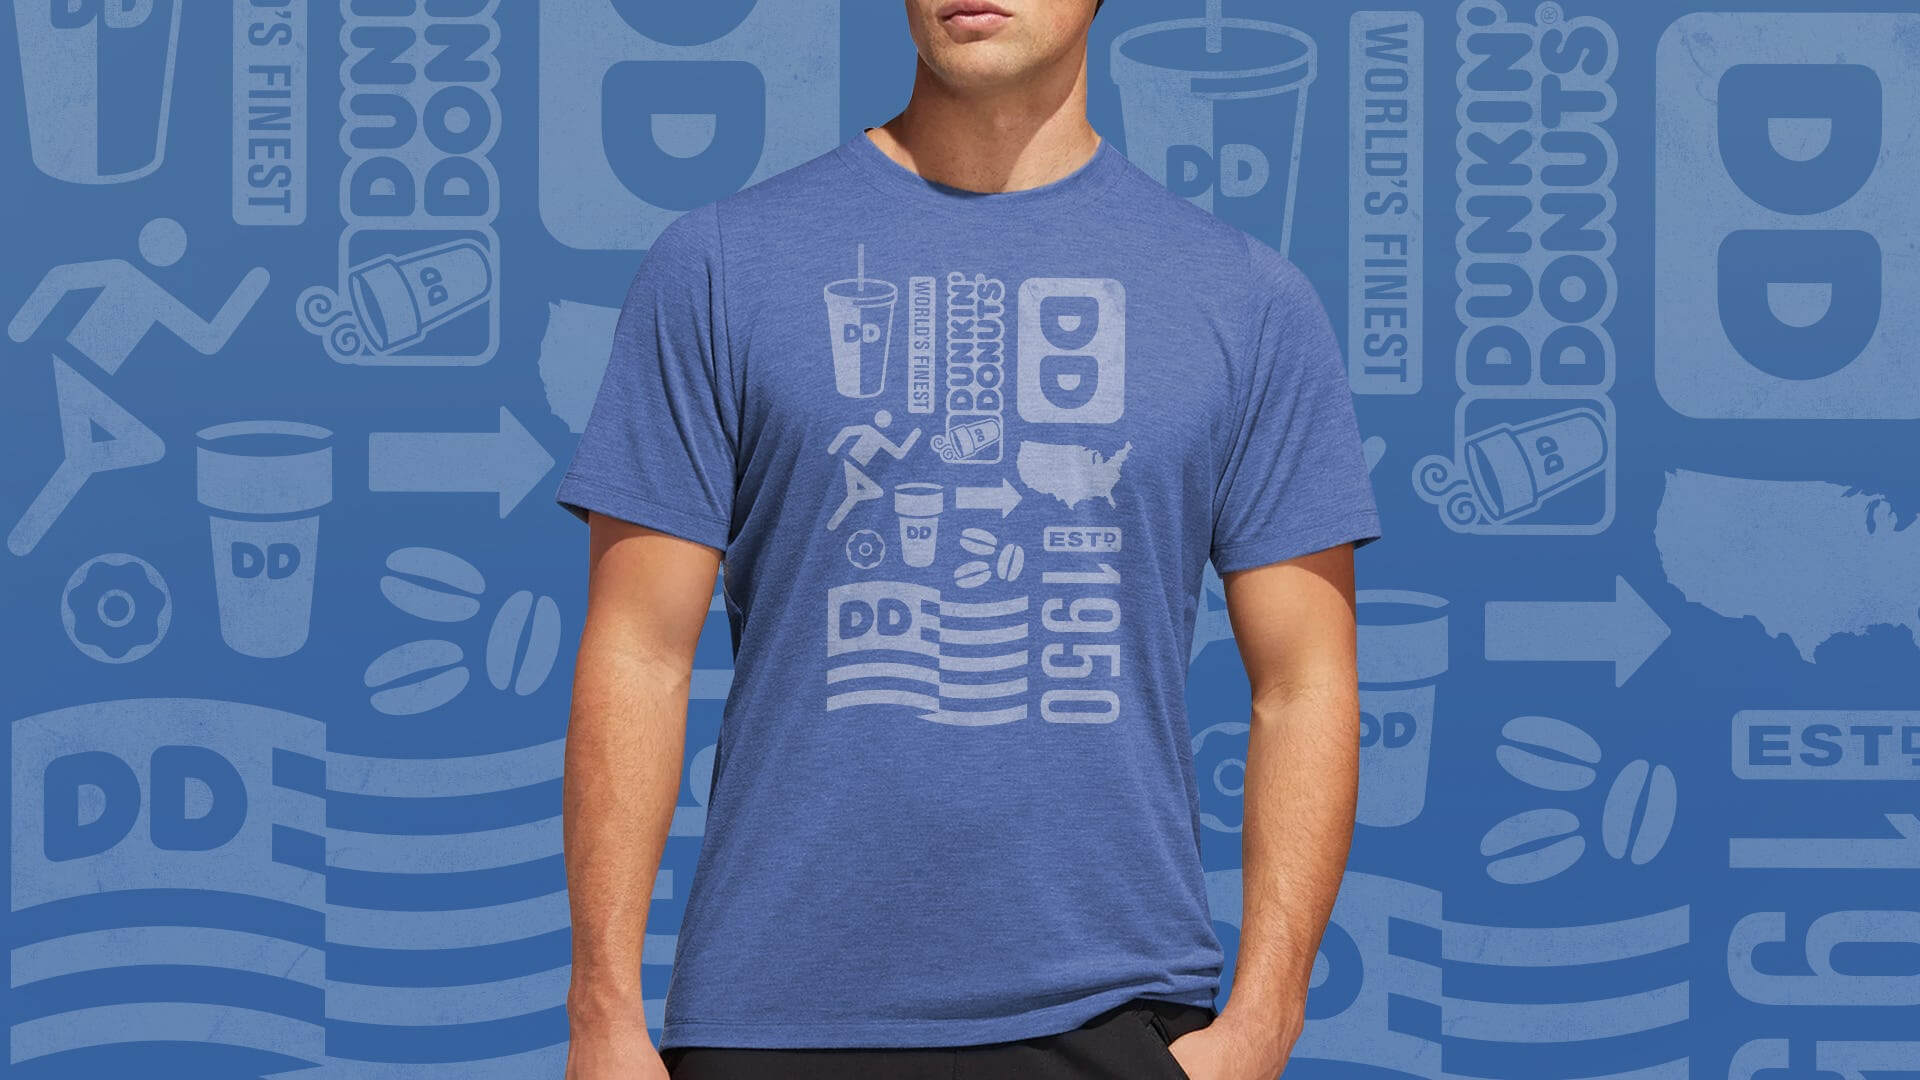 A person in a blue Dunkin' Donuts tshirt